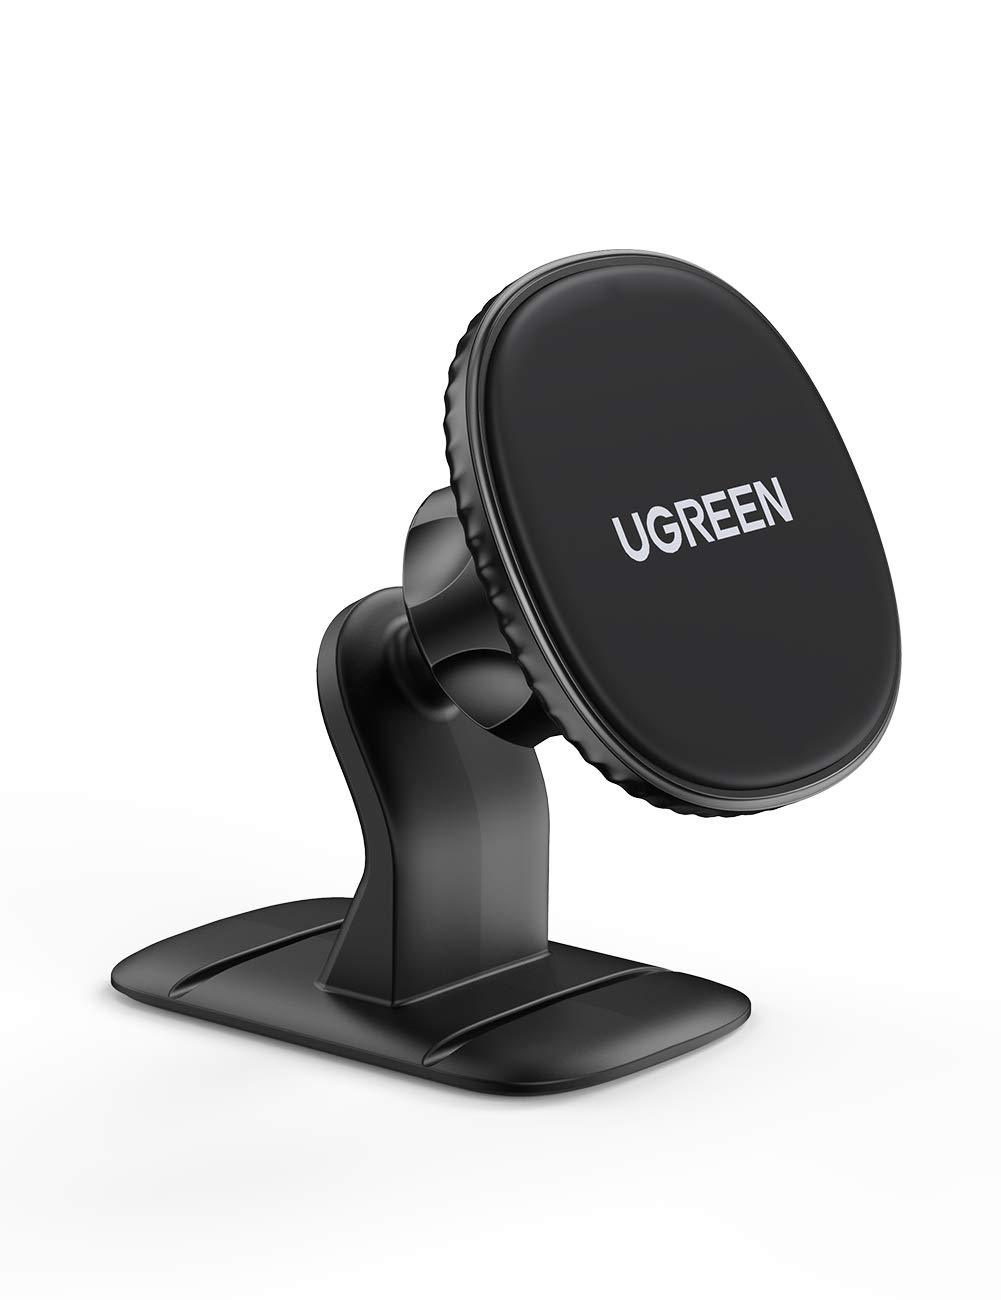 UGREEN Magnetic Phone Car Mount Magnet Cell Phone Holder Dash Mount Compatible for iPhone 13 Pro Max, iPhone 12 11 Pro Max XS XR X SE 8 7 Plus 6S 6, Samsung Galaxy Note20 S20 S10 S9 S8 Note 10 9 8